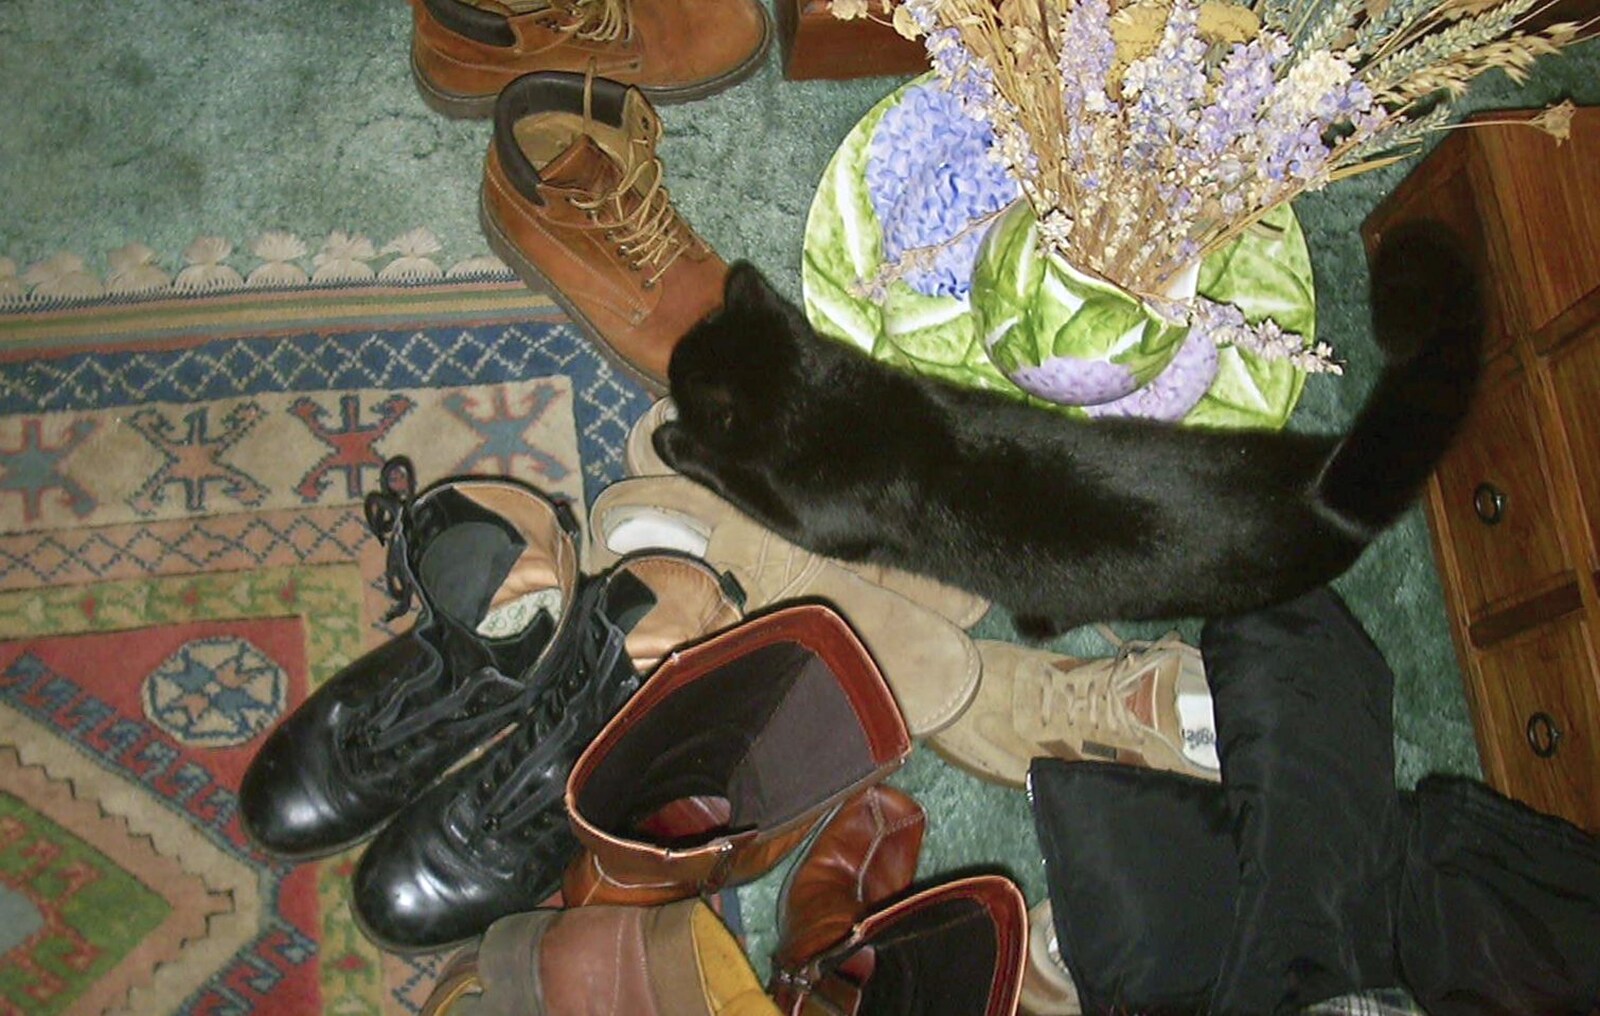 Mini, the other cat, is in the shoes from Sarah's Games Night at Anne's, Thornham, Suffolk - 27th December 2003